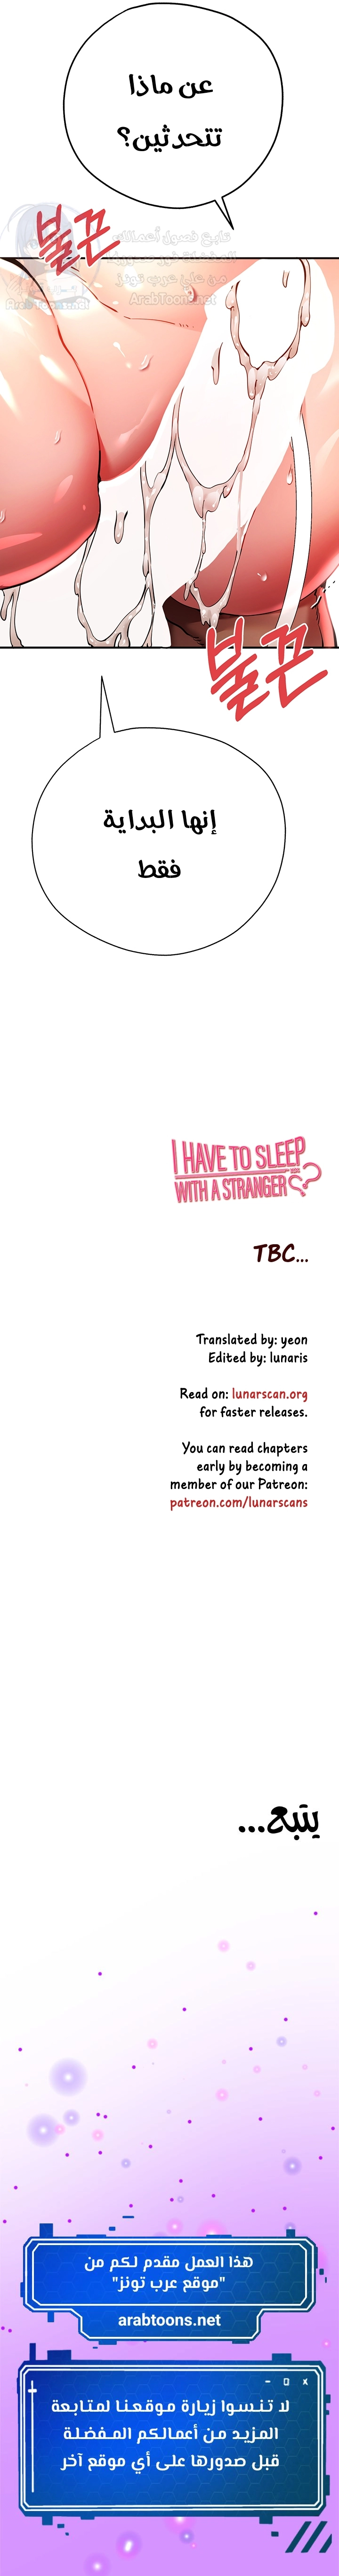 I Have To Sleep With A Stranger? - 17 - 6532a6e0d979a.webp